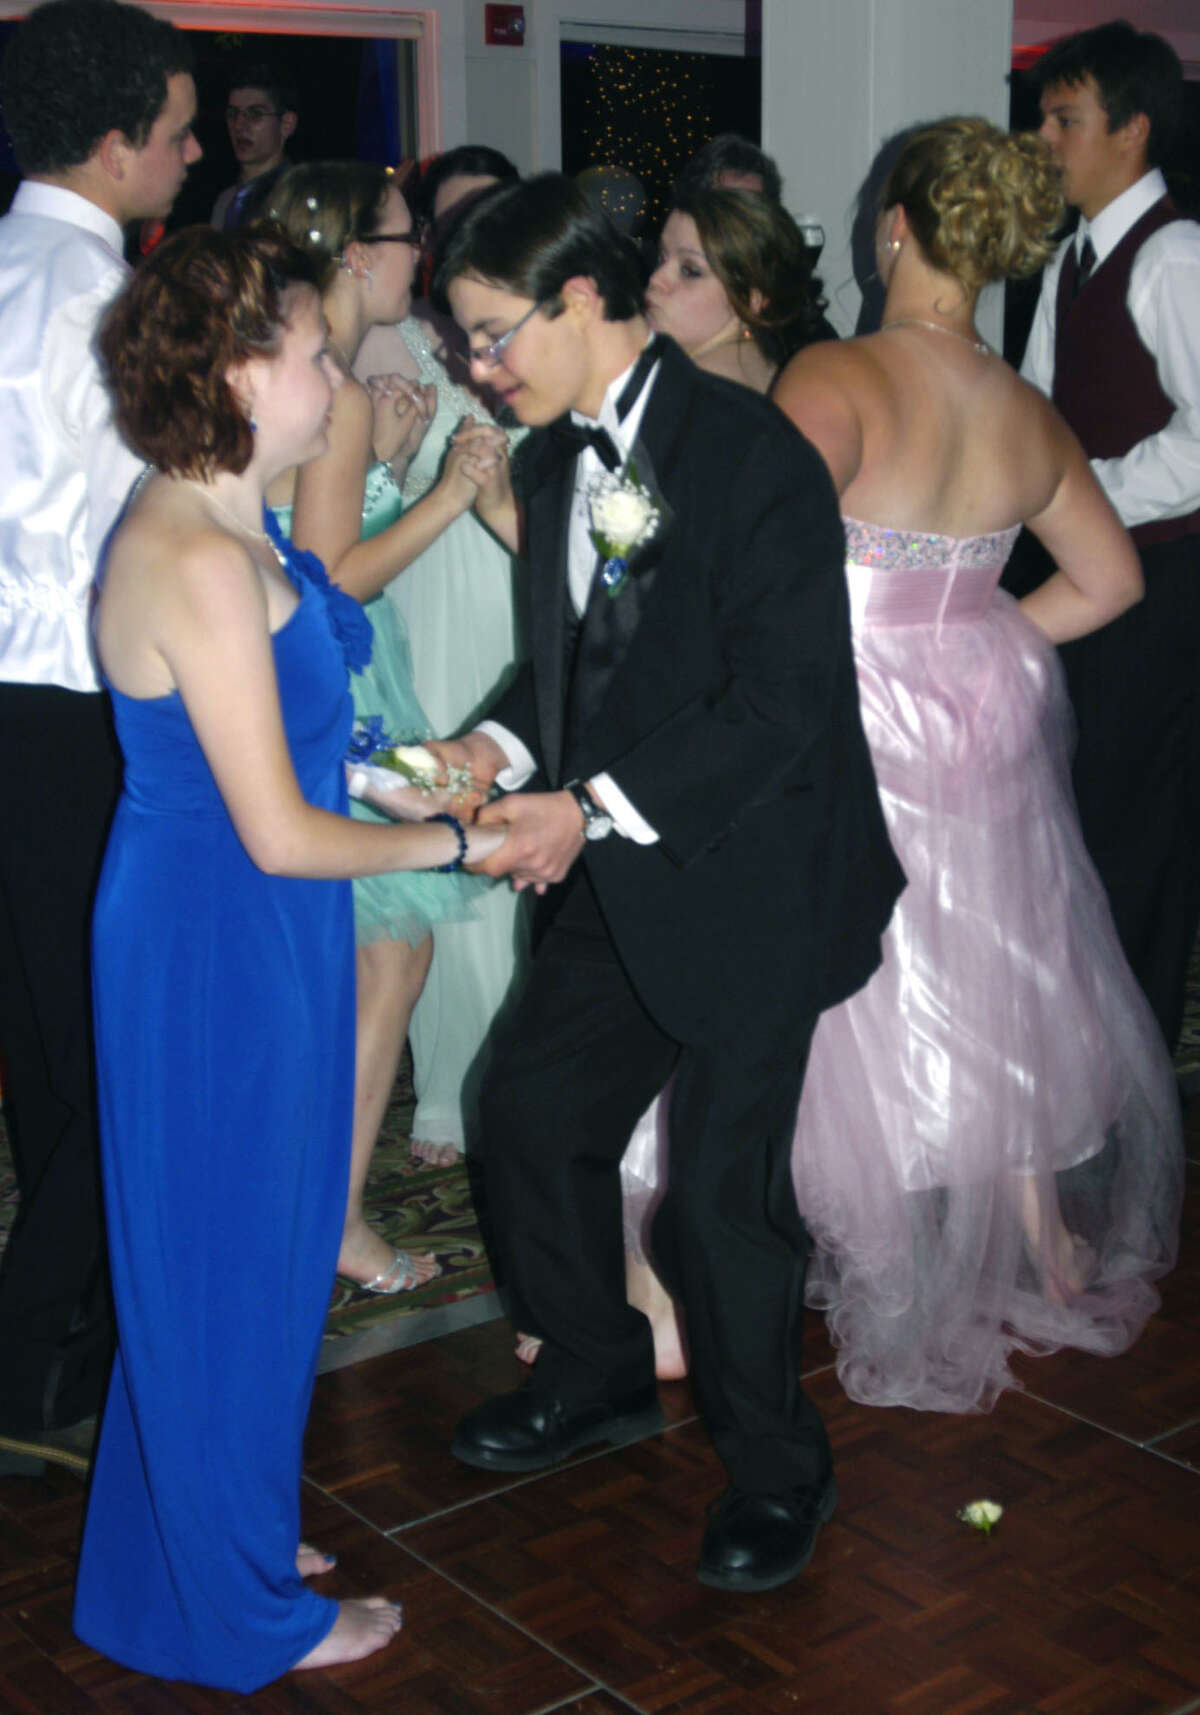 Justin Isaac and his date, Cheyenne Daugherty, enjoy a dance during the Shepaug Valley High School prom, May 25, 2013 at the Heritage Inn in Southbury.